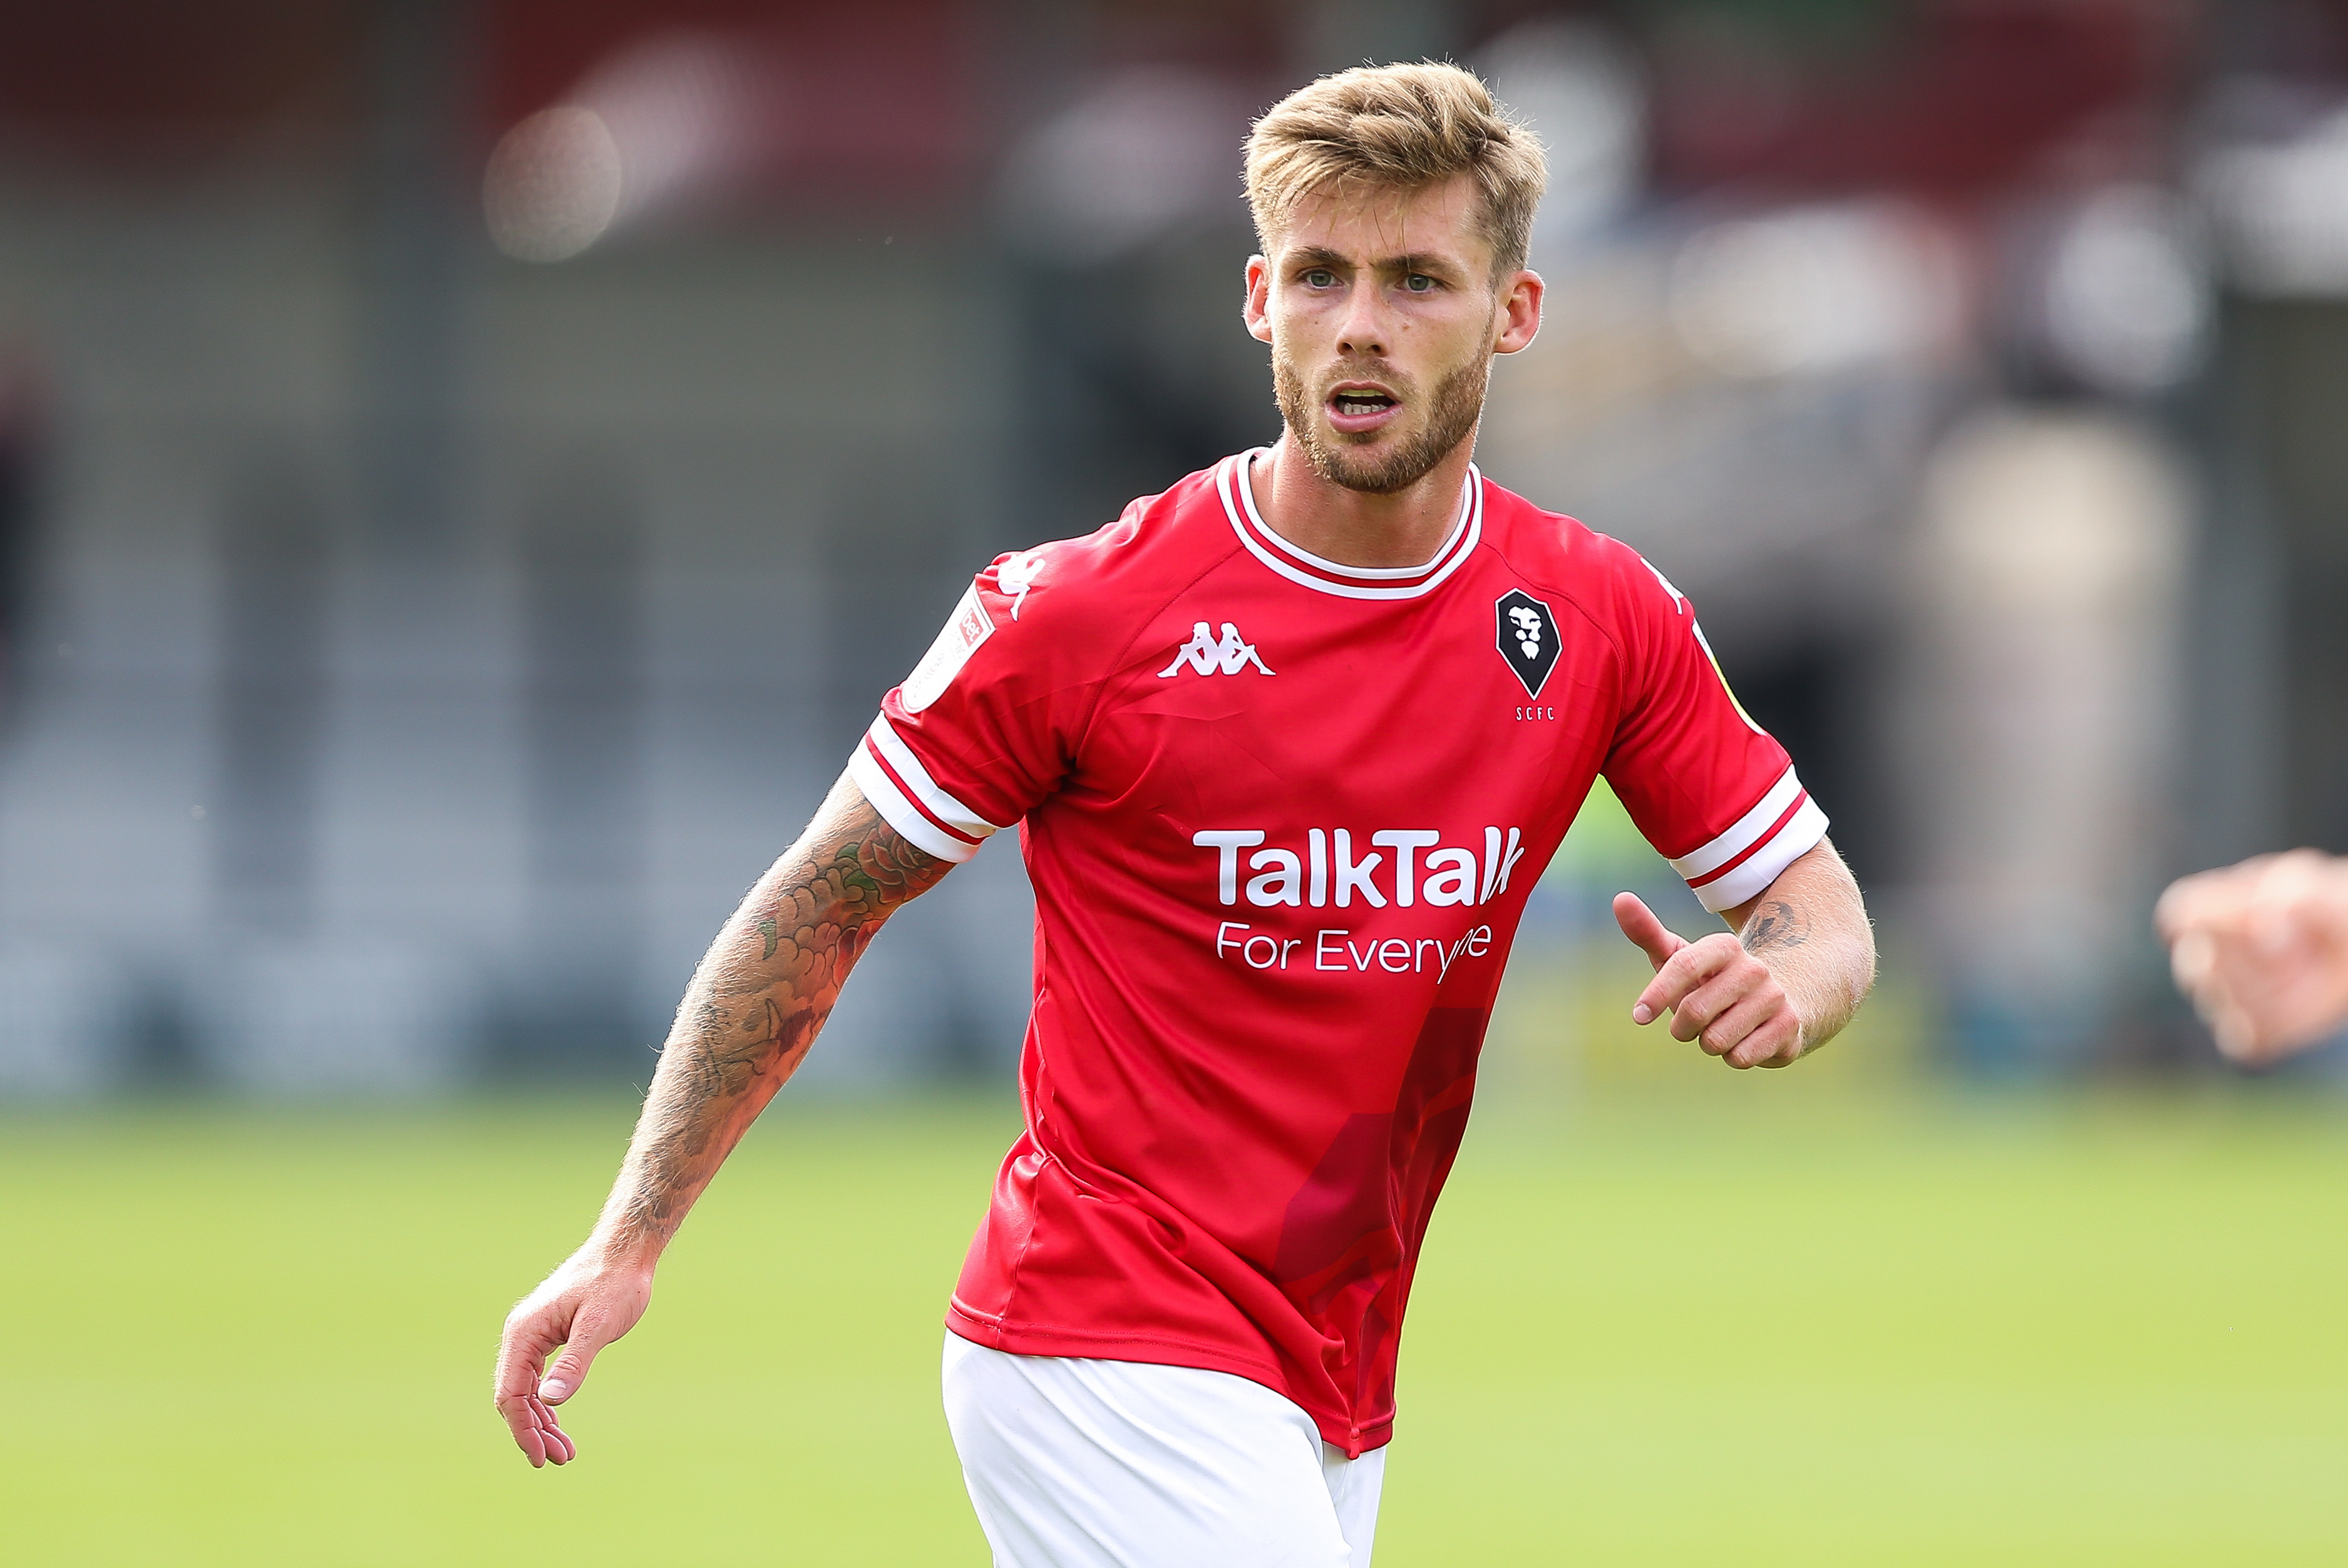 Salford City FC on X: "Happy Birthday to forward Conor McAleny ???? We hope you had a great day! #WeAreSalford ???????? https://t.co/NorL9li8sj" / X